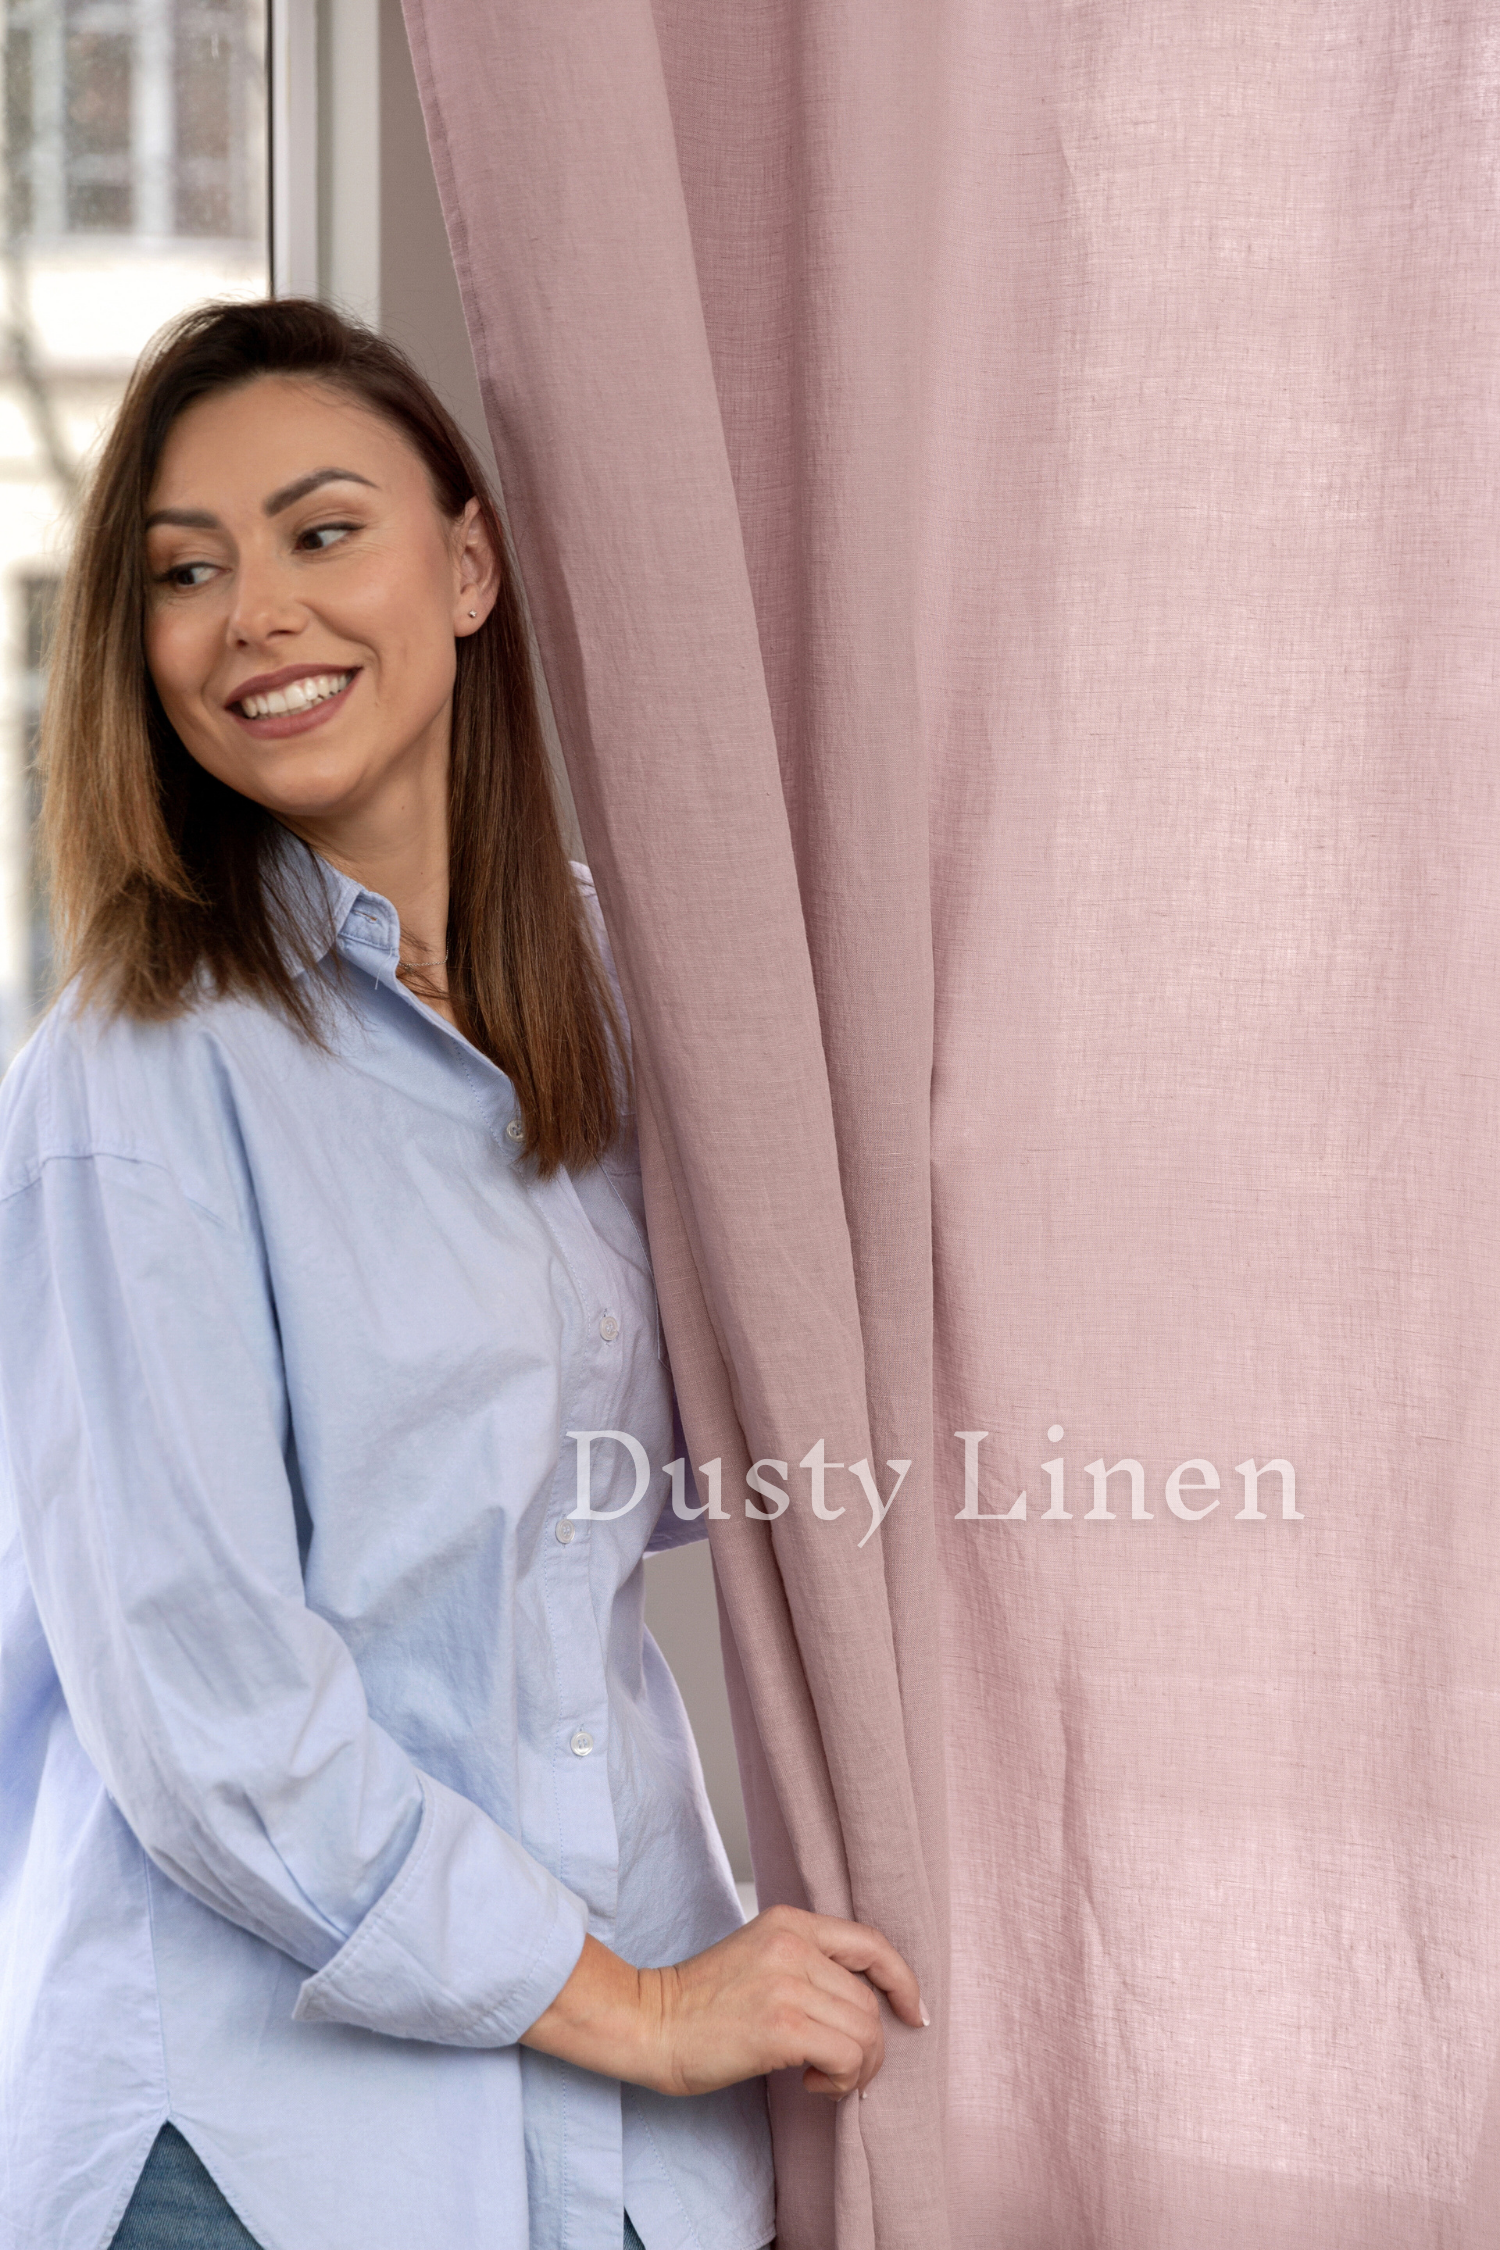 a woman standing next to a pink curtain